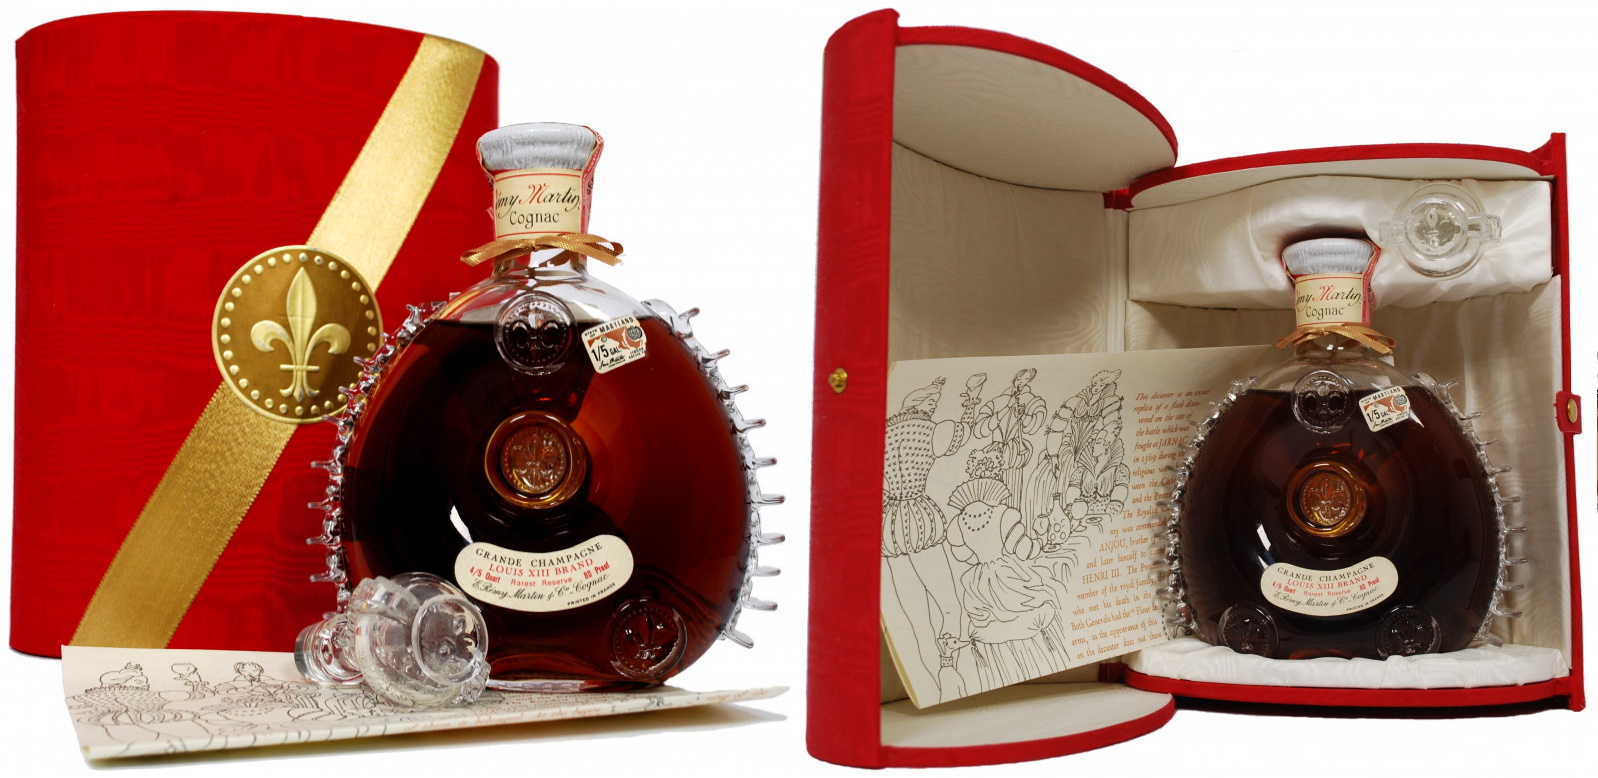 Cognac Remy Martin Louis XIII one of the best types of Other Drinks